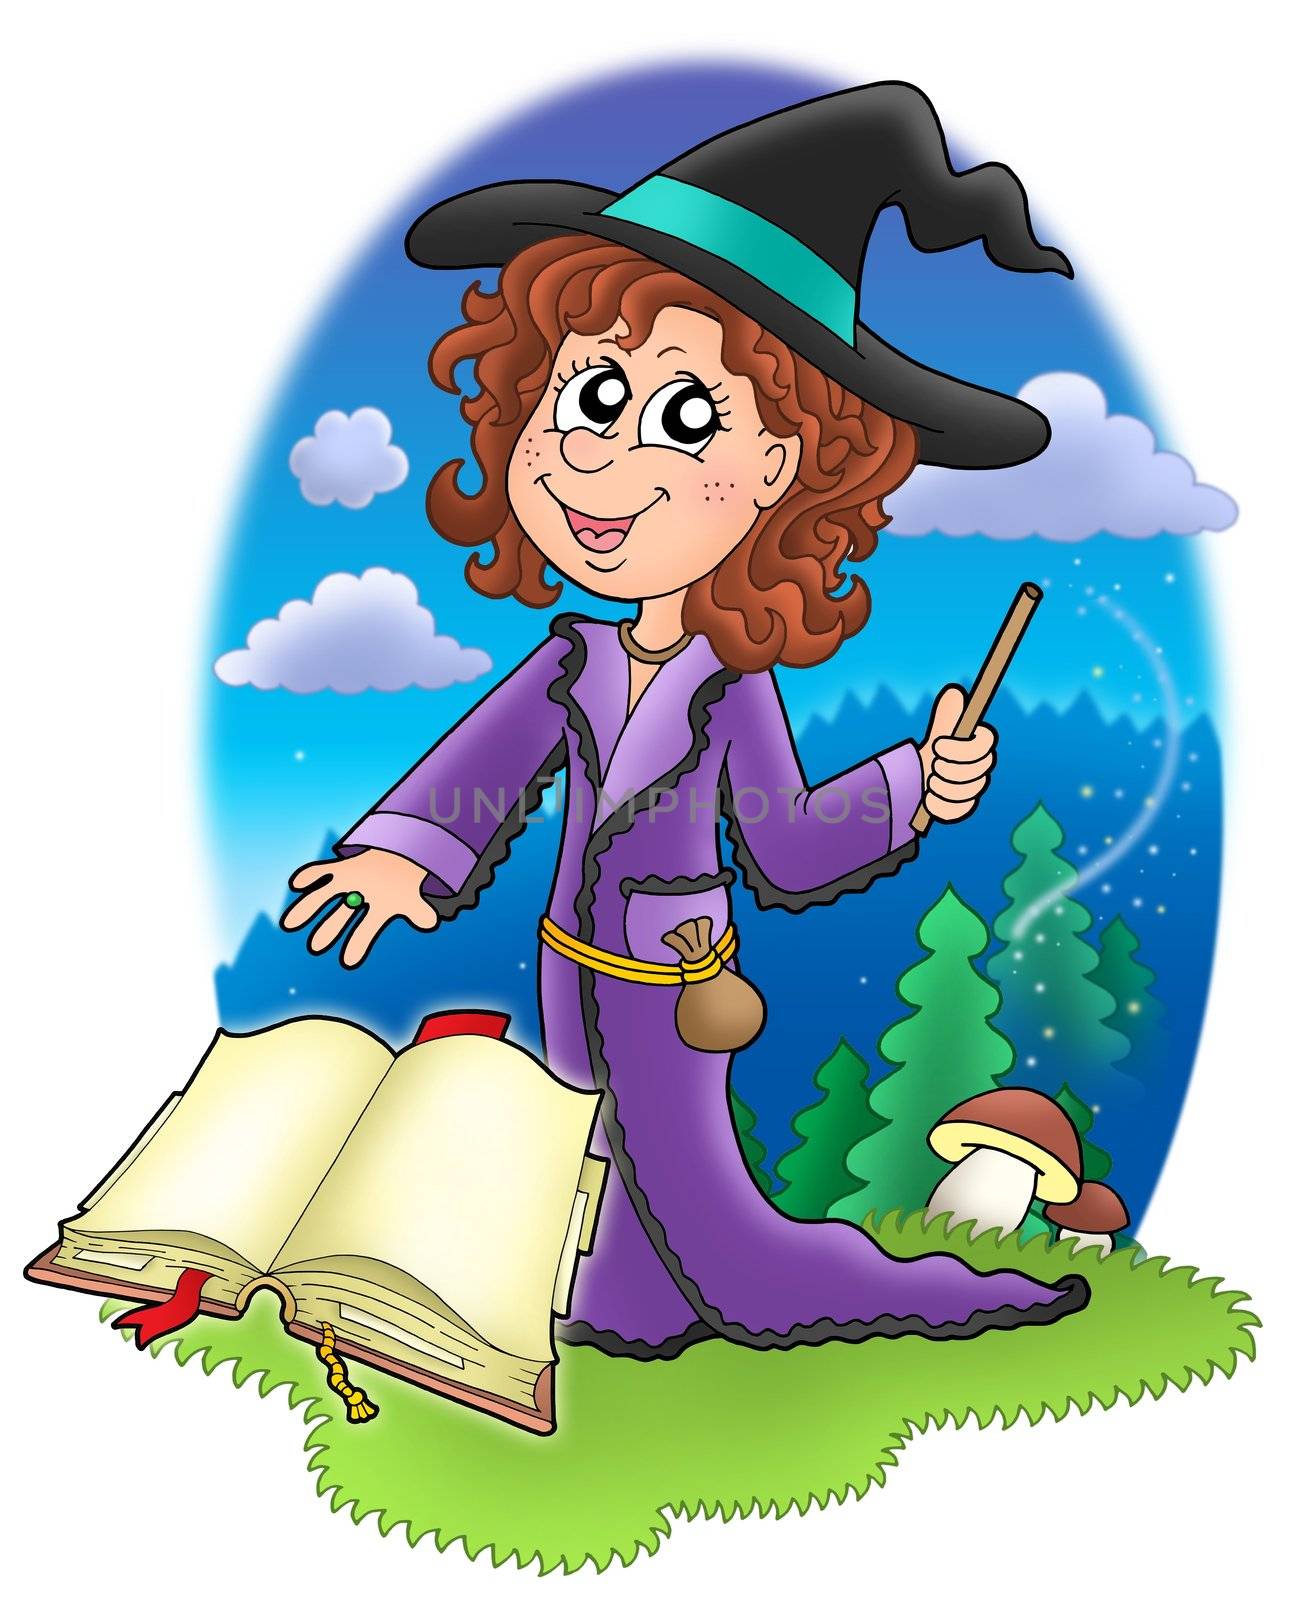 Cute witch with wand and book - color illustration